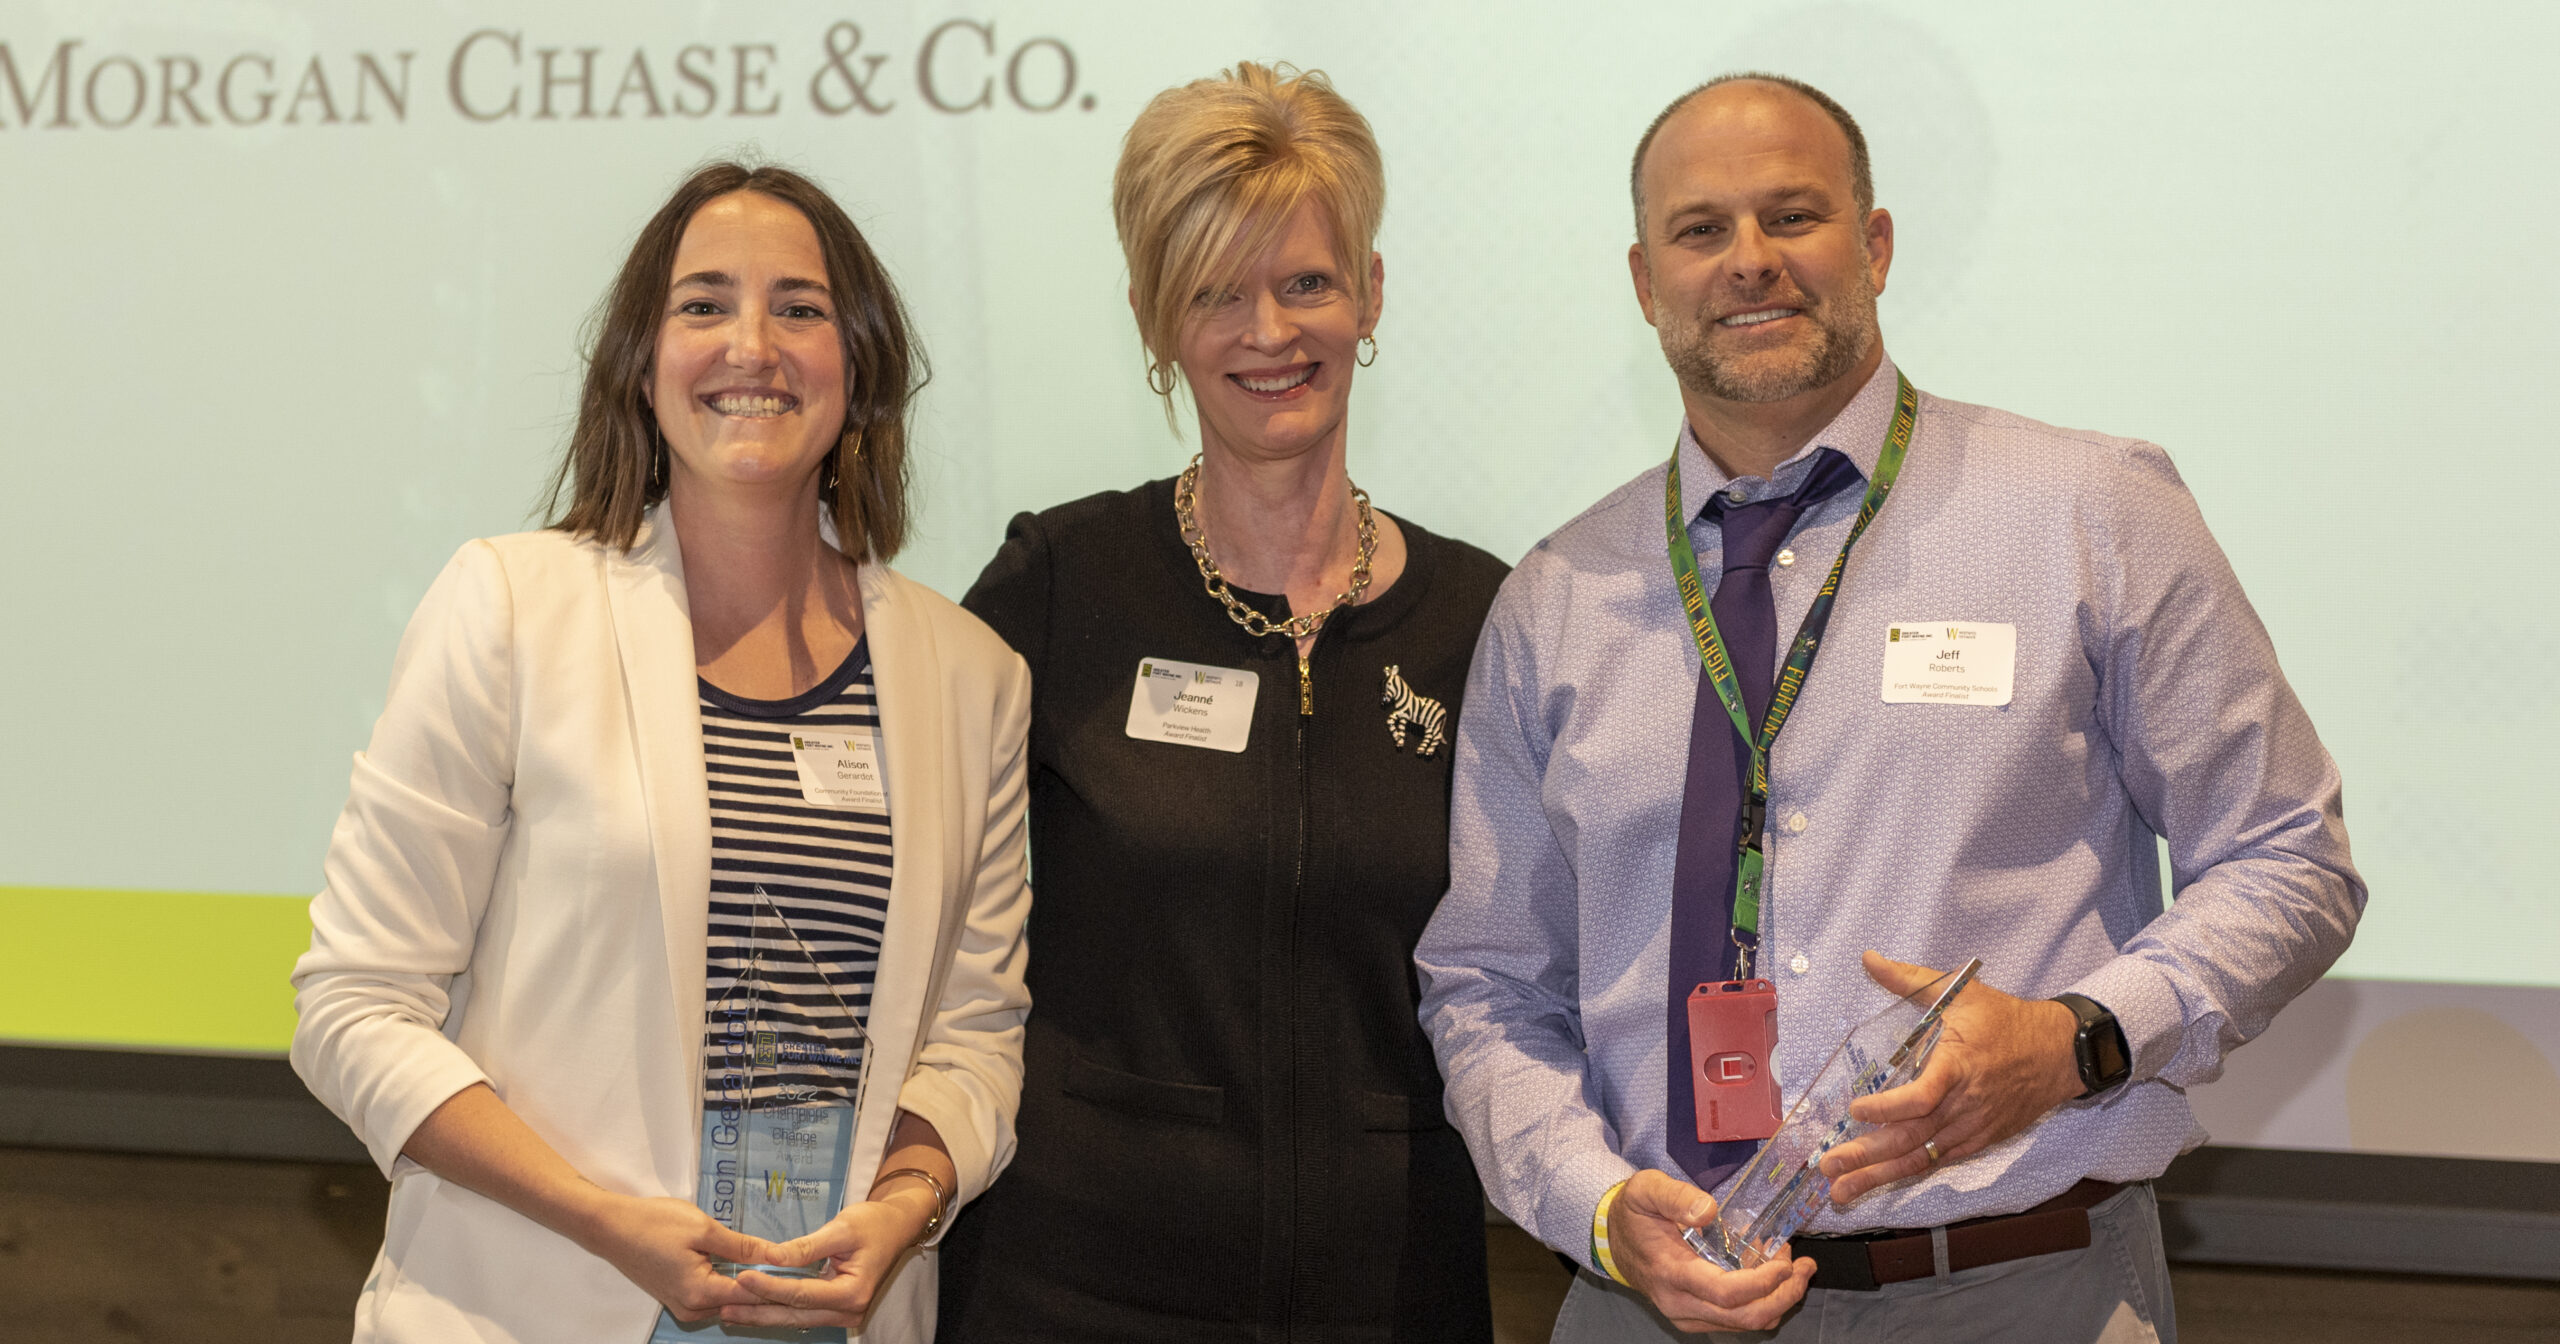 Alison Gerardot, Jeanne Wickens, and Jeff Roberts pose with their Champions of Change awards